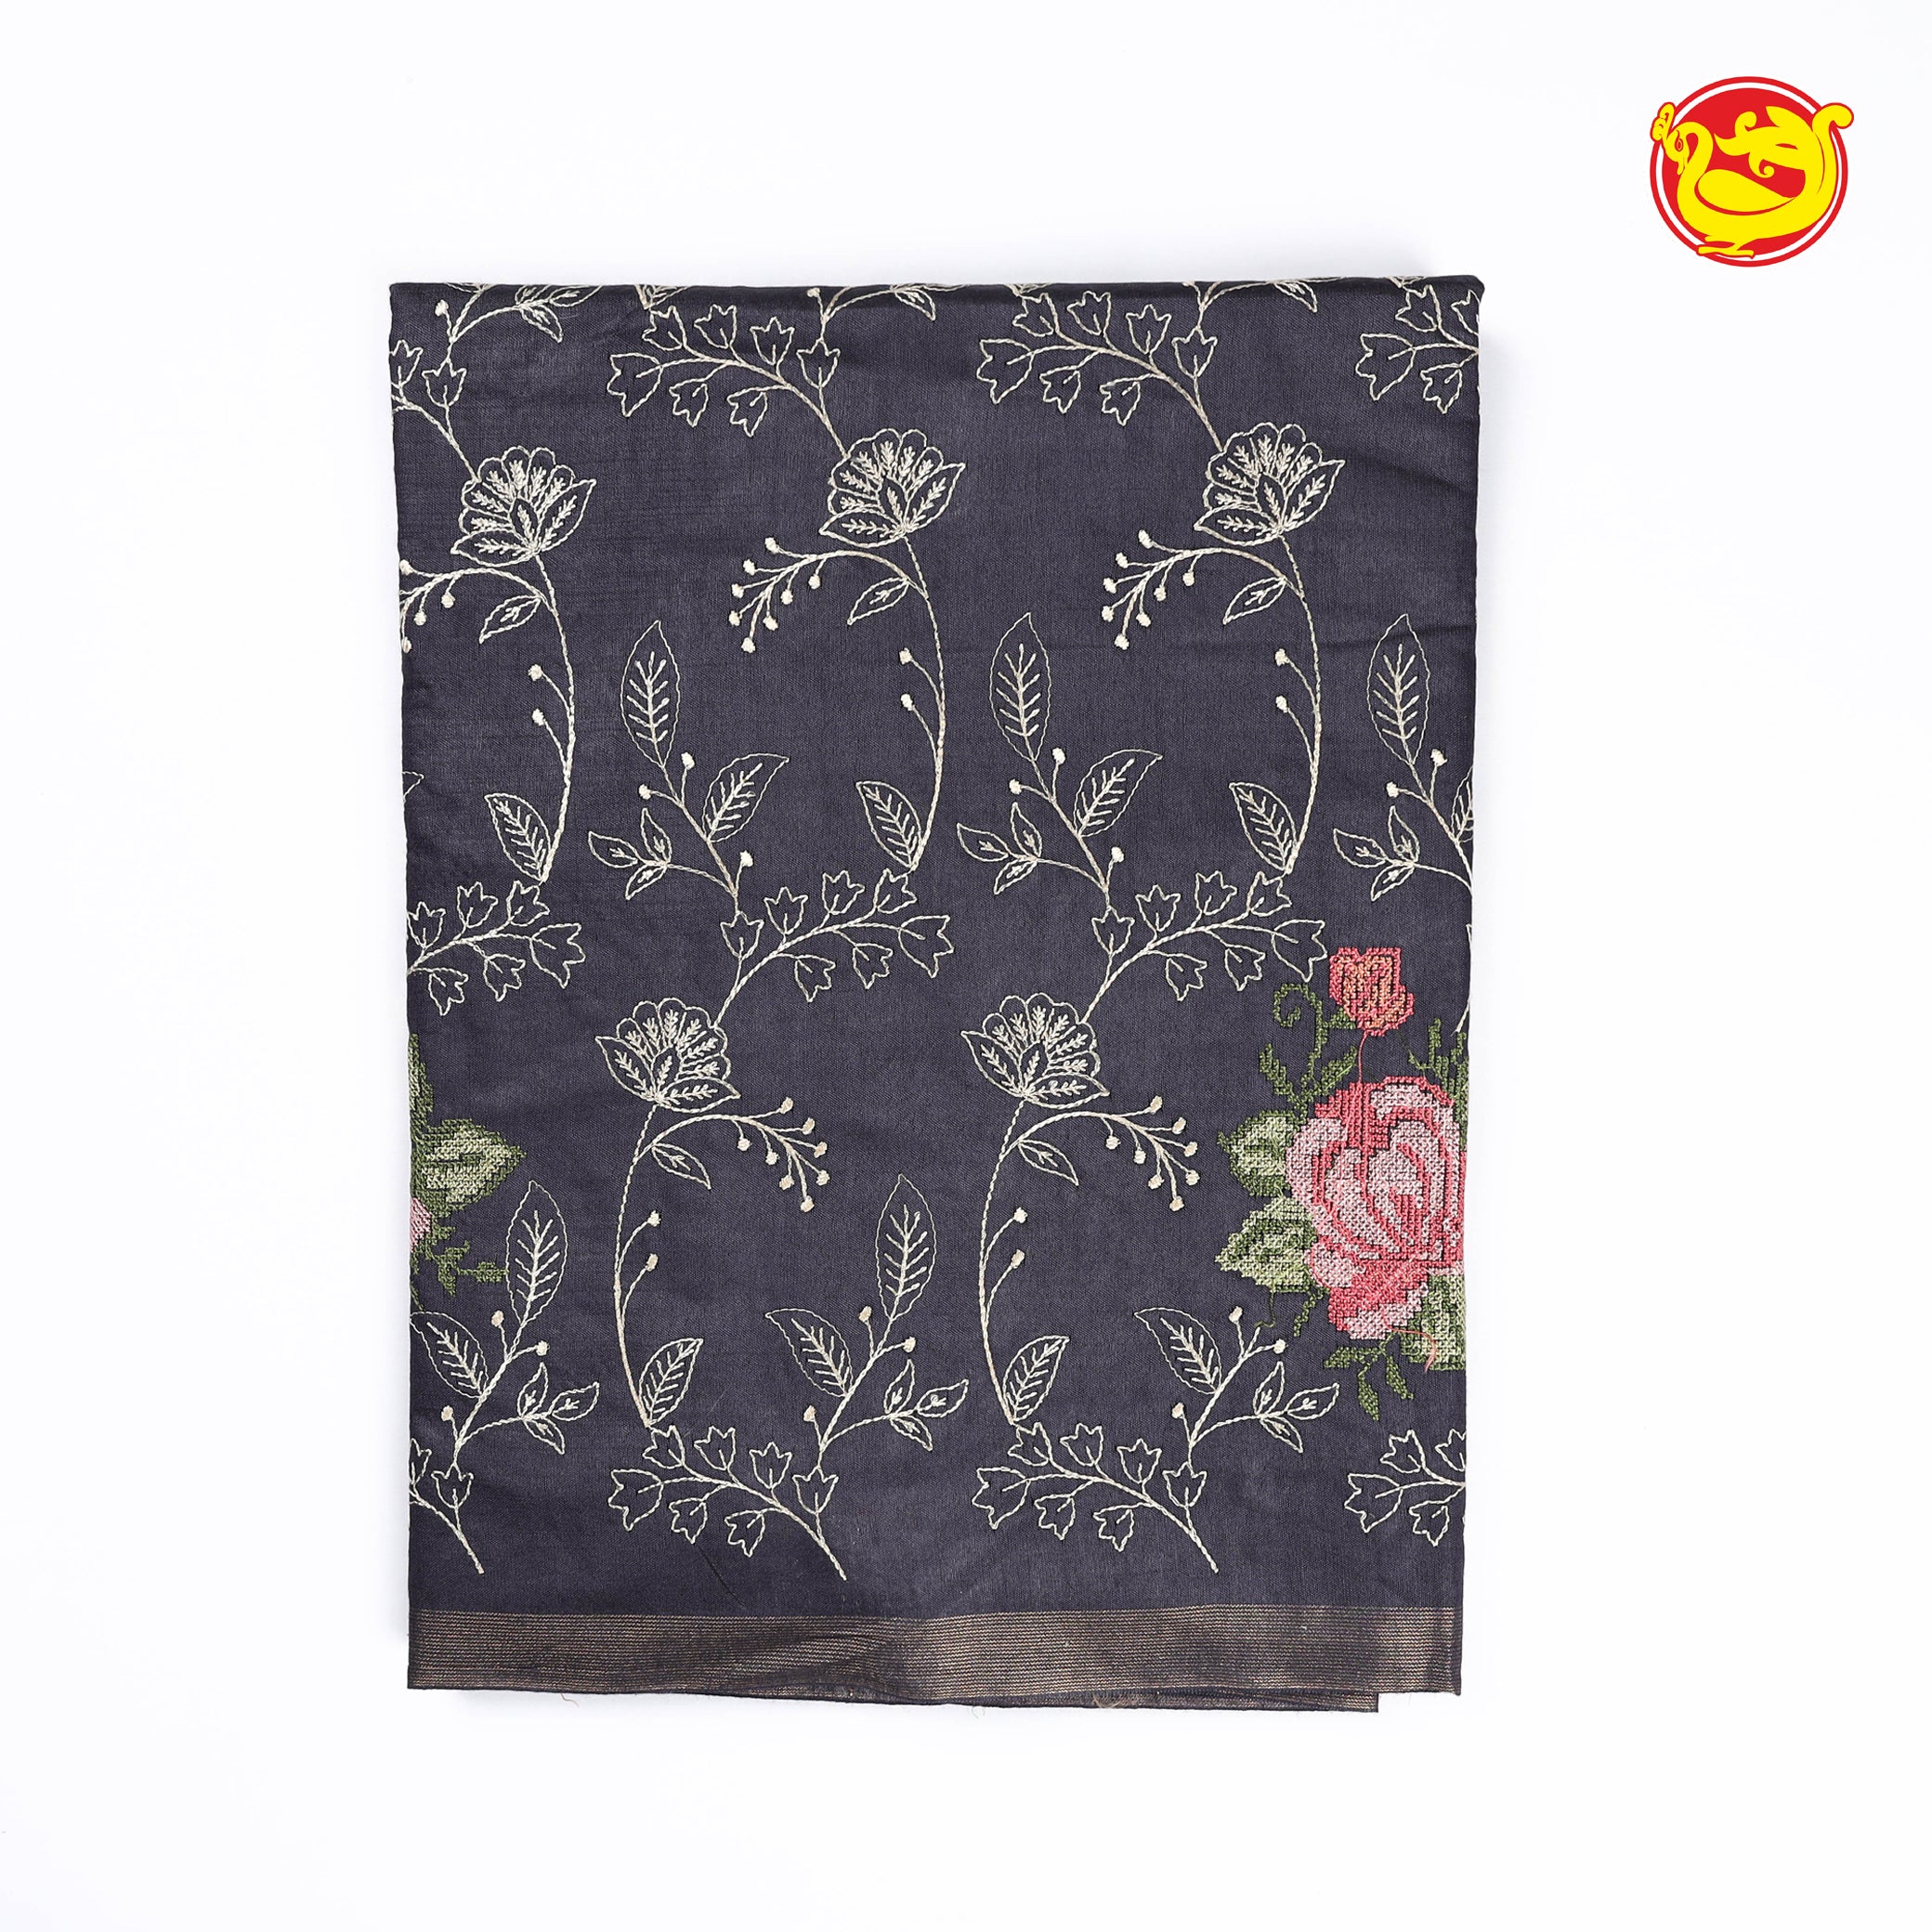 Charcoal grey art tussar saree with floral embroidery